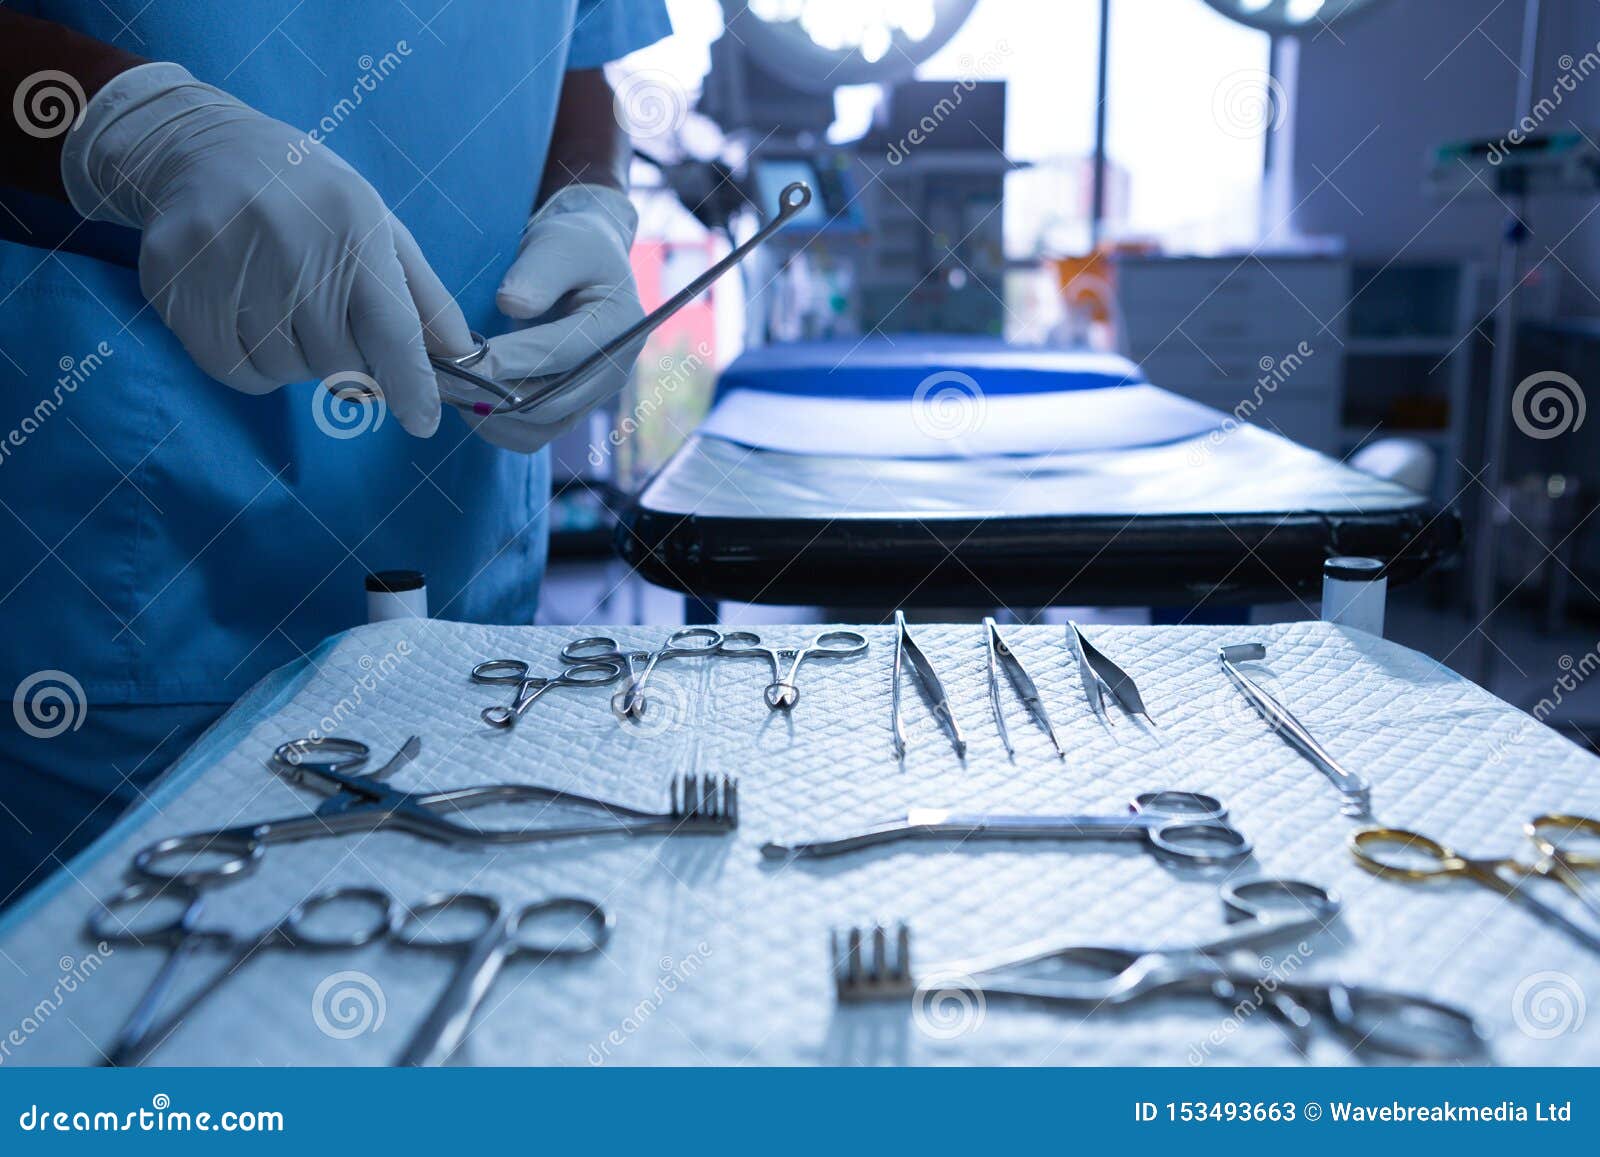 surgeon holding surgical instrument in operating room of hospital